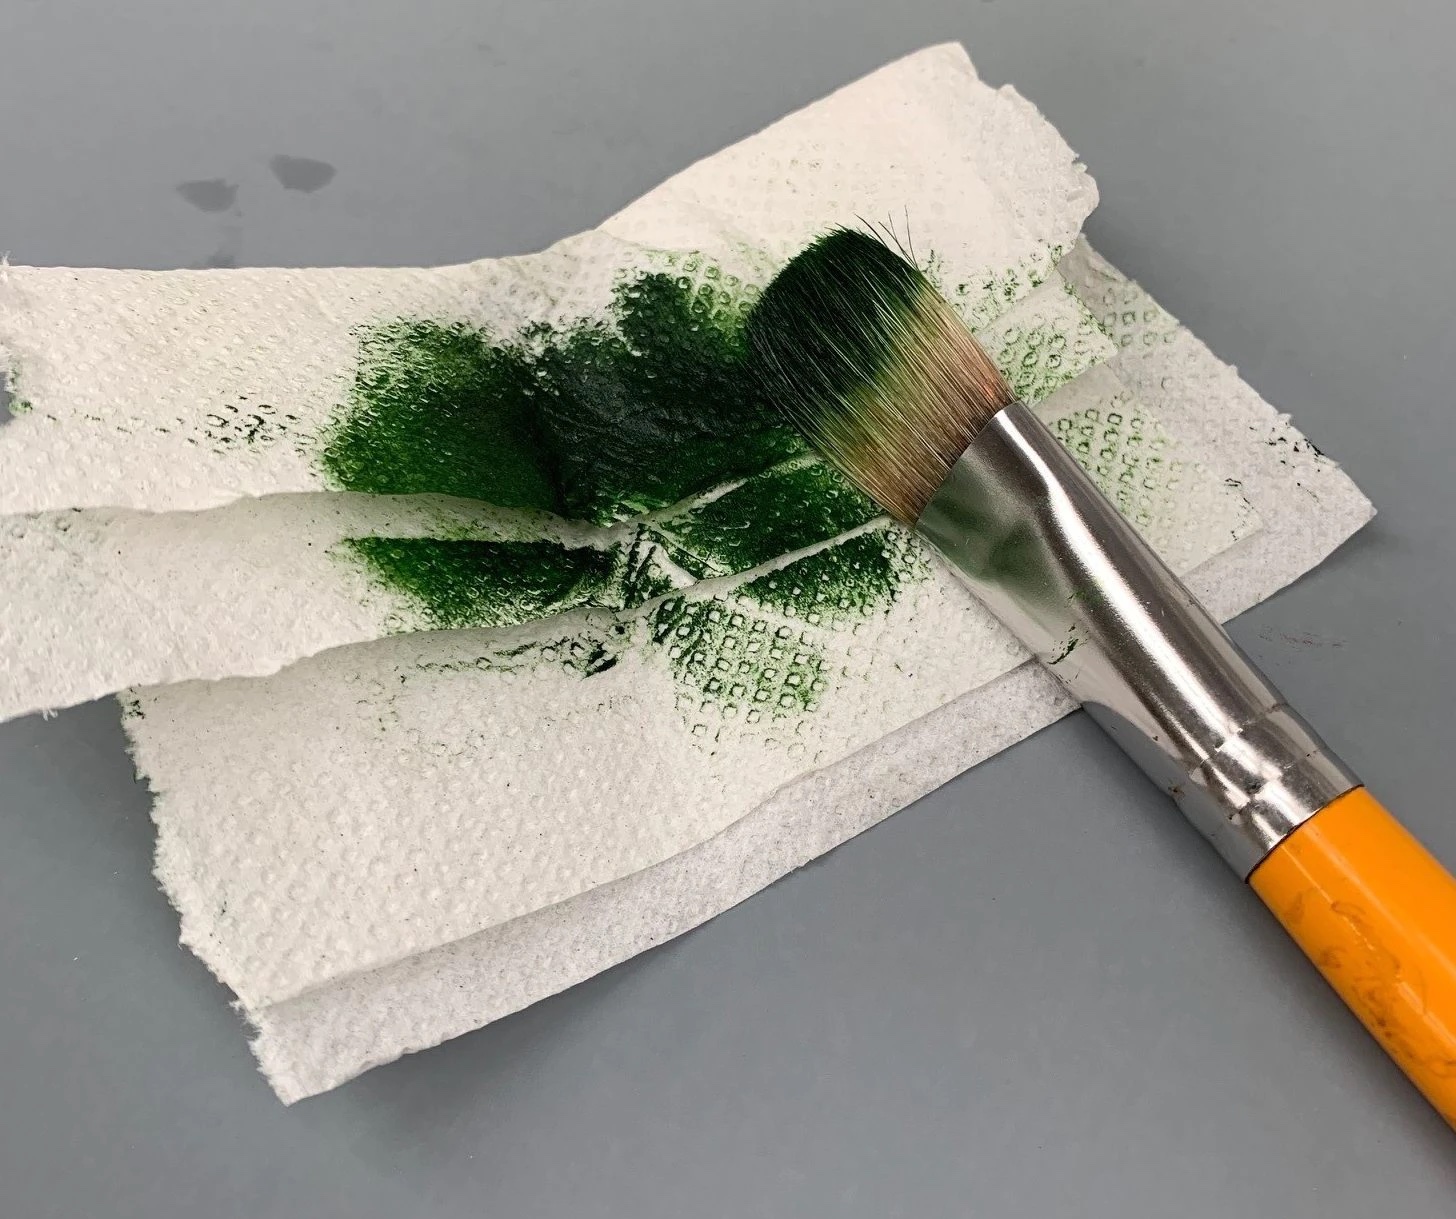 Art Tutorials: Clean Your Art Brushes in 3 Easy Steps